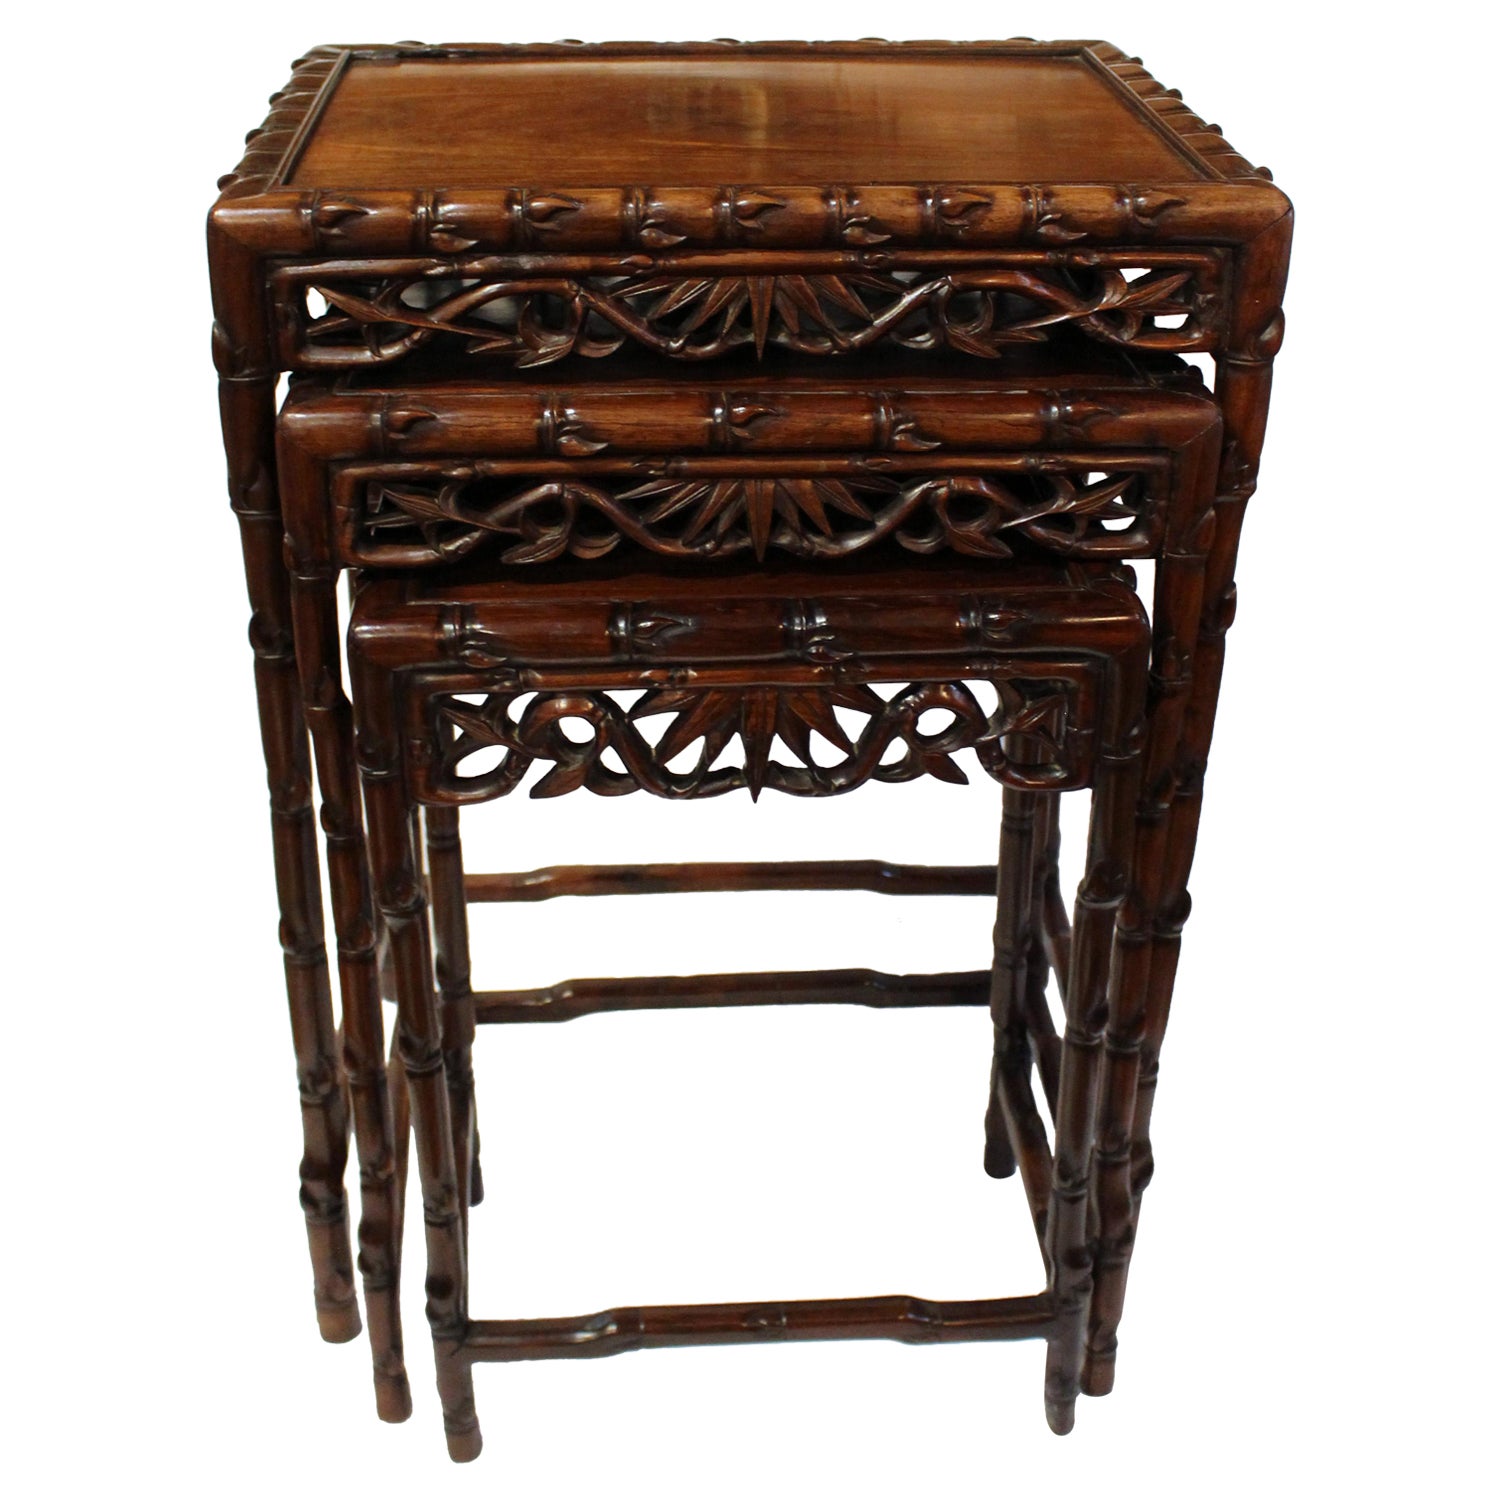 Circa 1865 Set of Chinese Nesting Tables